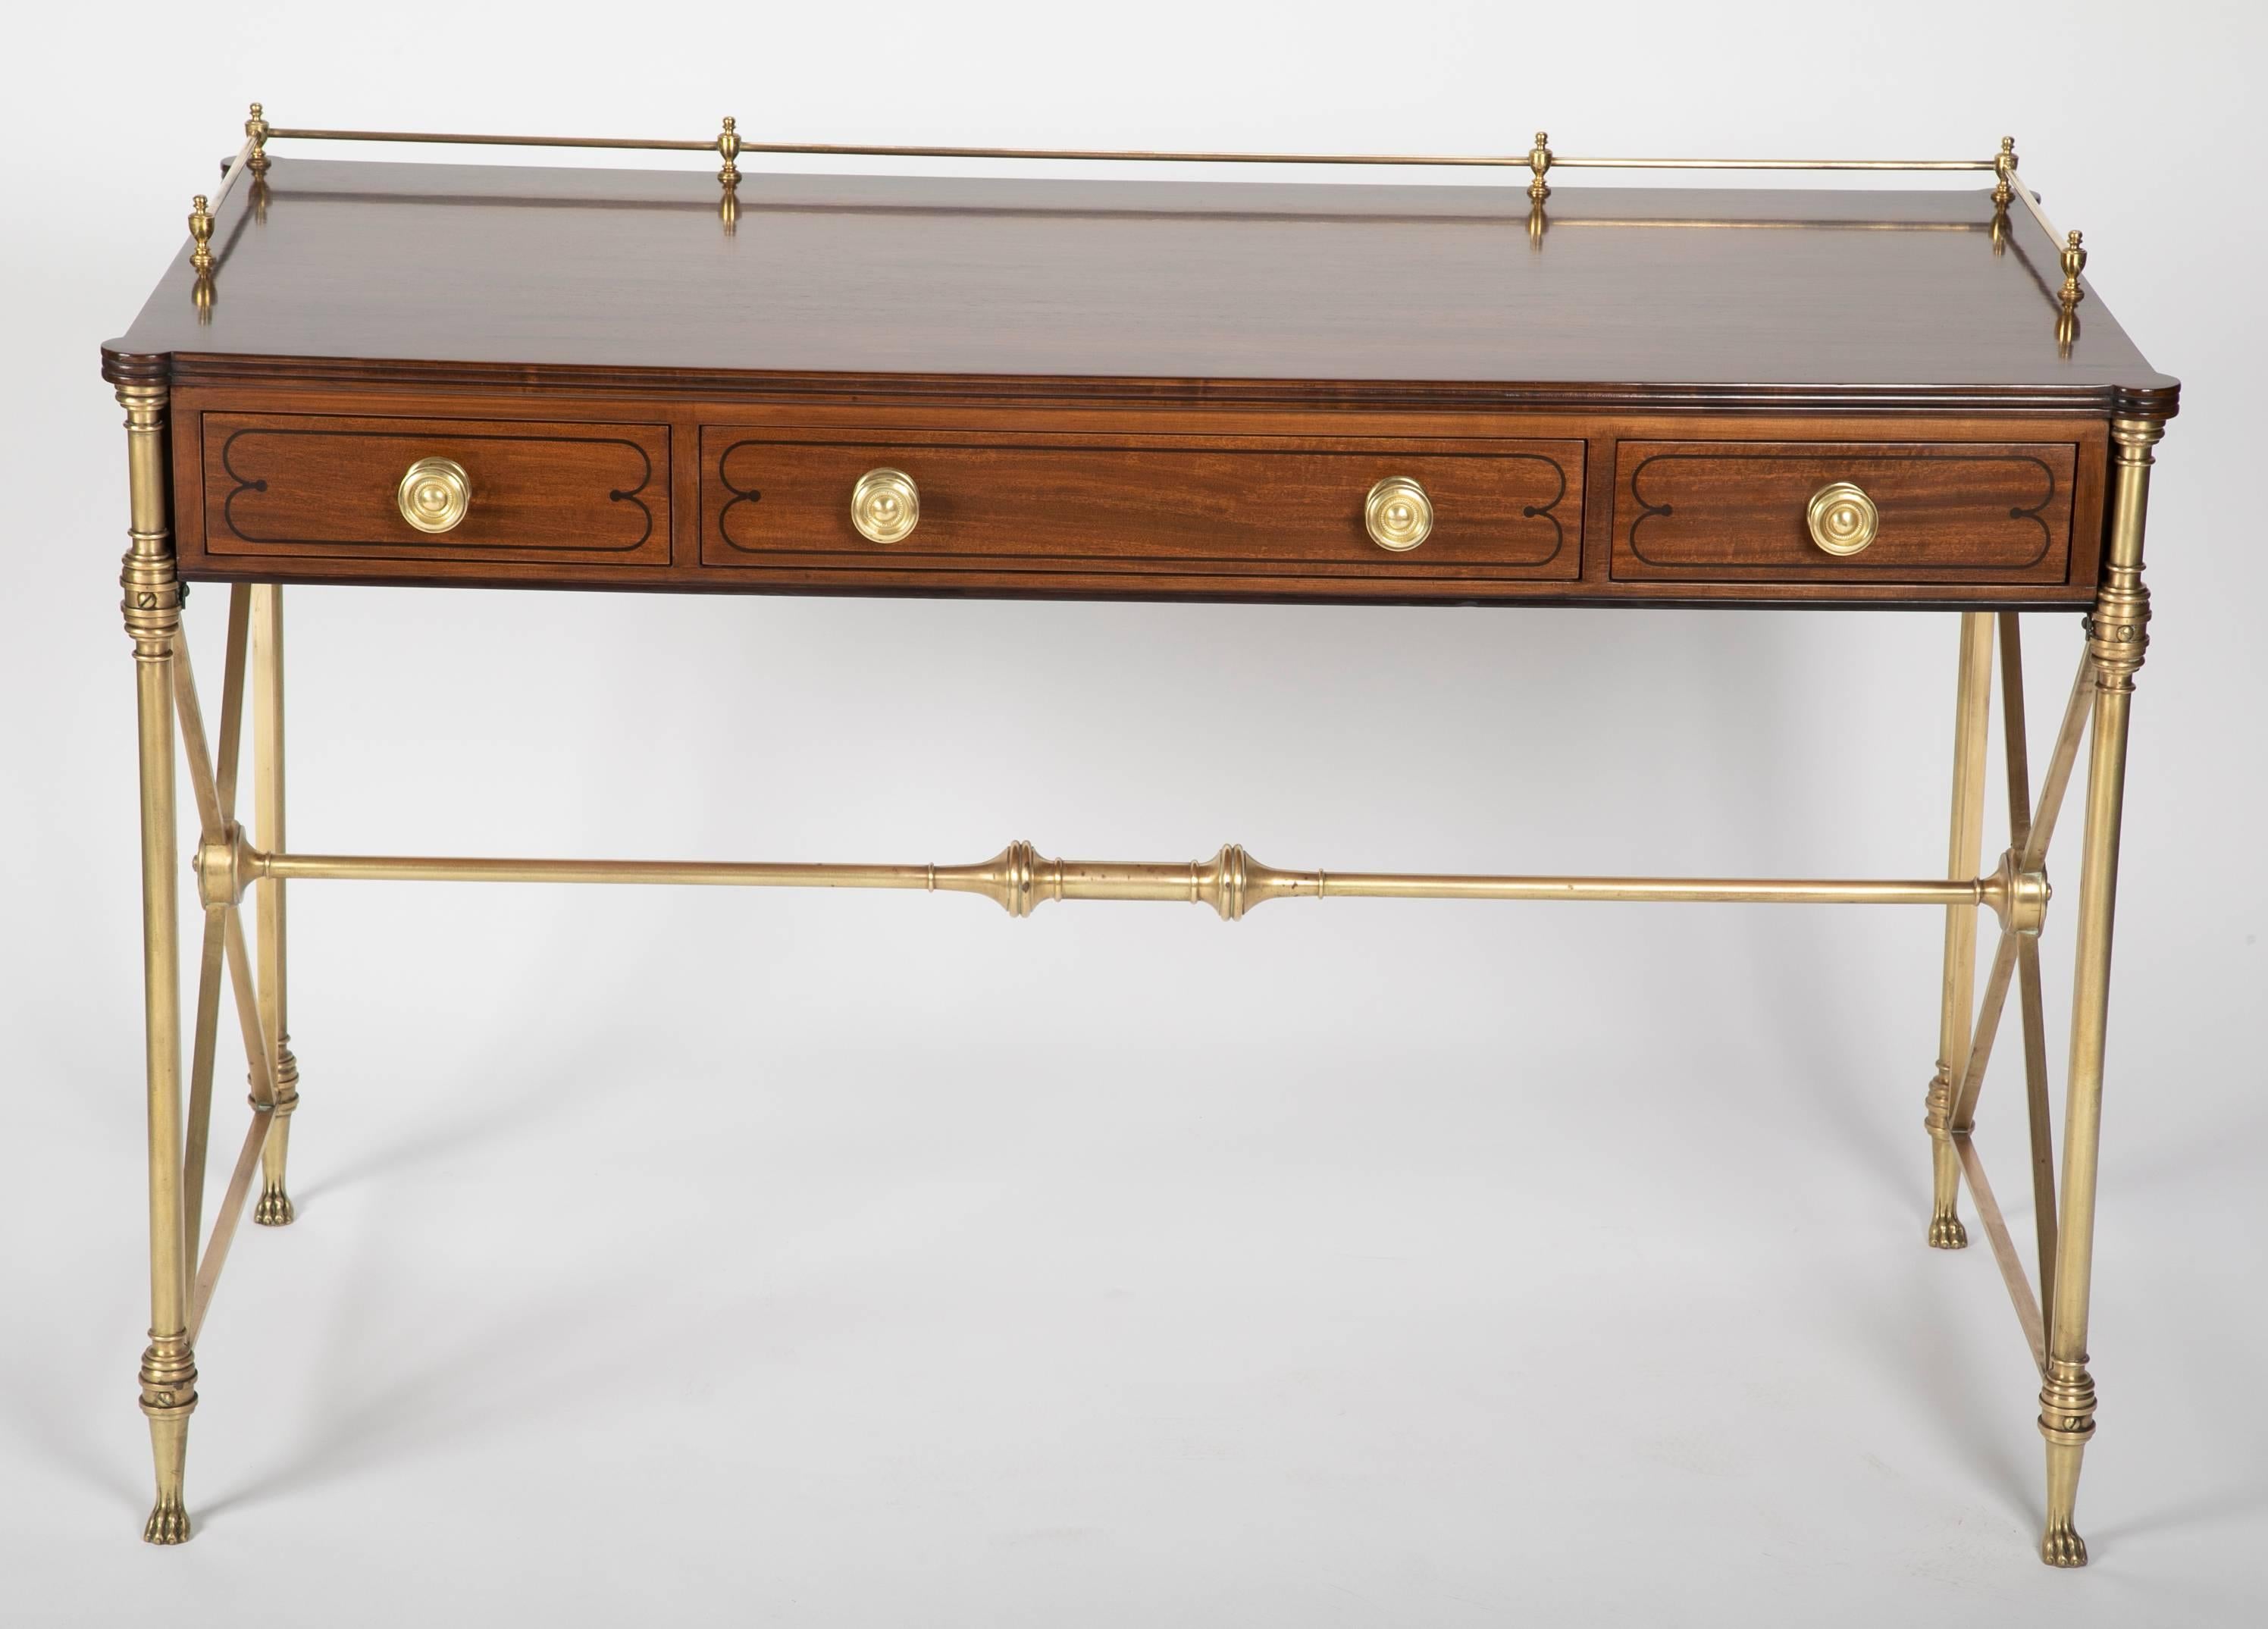 Classic rosewood Campaign desk in the English Regency style. With bronze legs and stretcher, the legs ending in paw feet, X form stretchers at the sides. This handsome, beautifully designed desk is simply elegant, echoing neoclassical design.